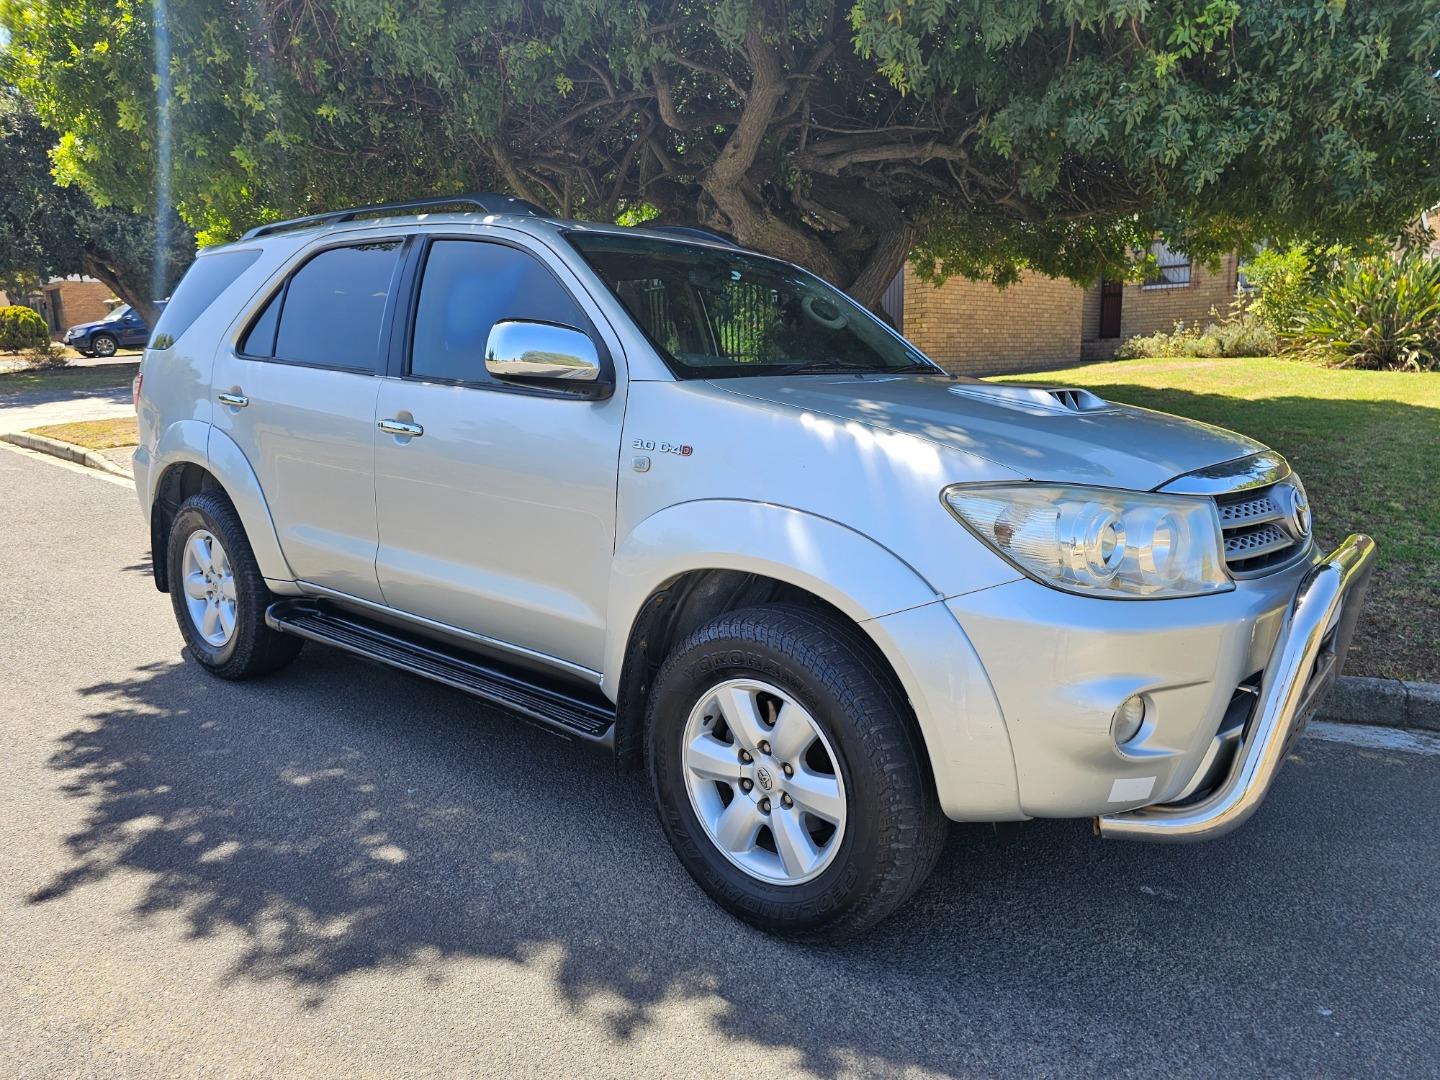 2011 Toyota Fortuner 3.0D-4D 4x4 auto For Sale